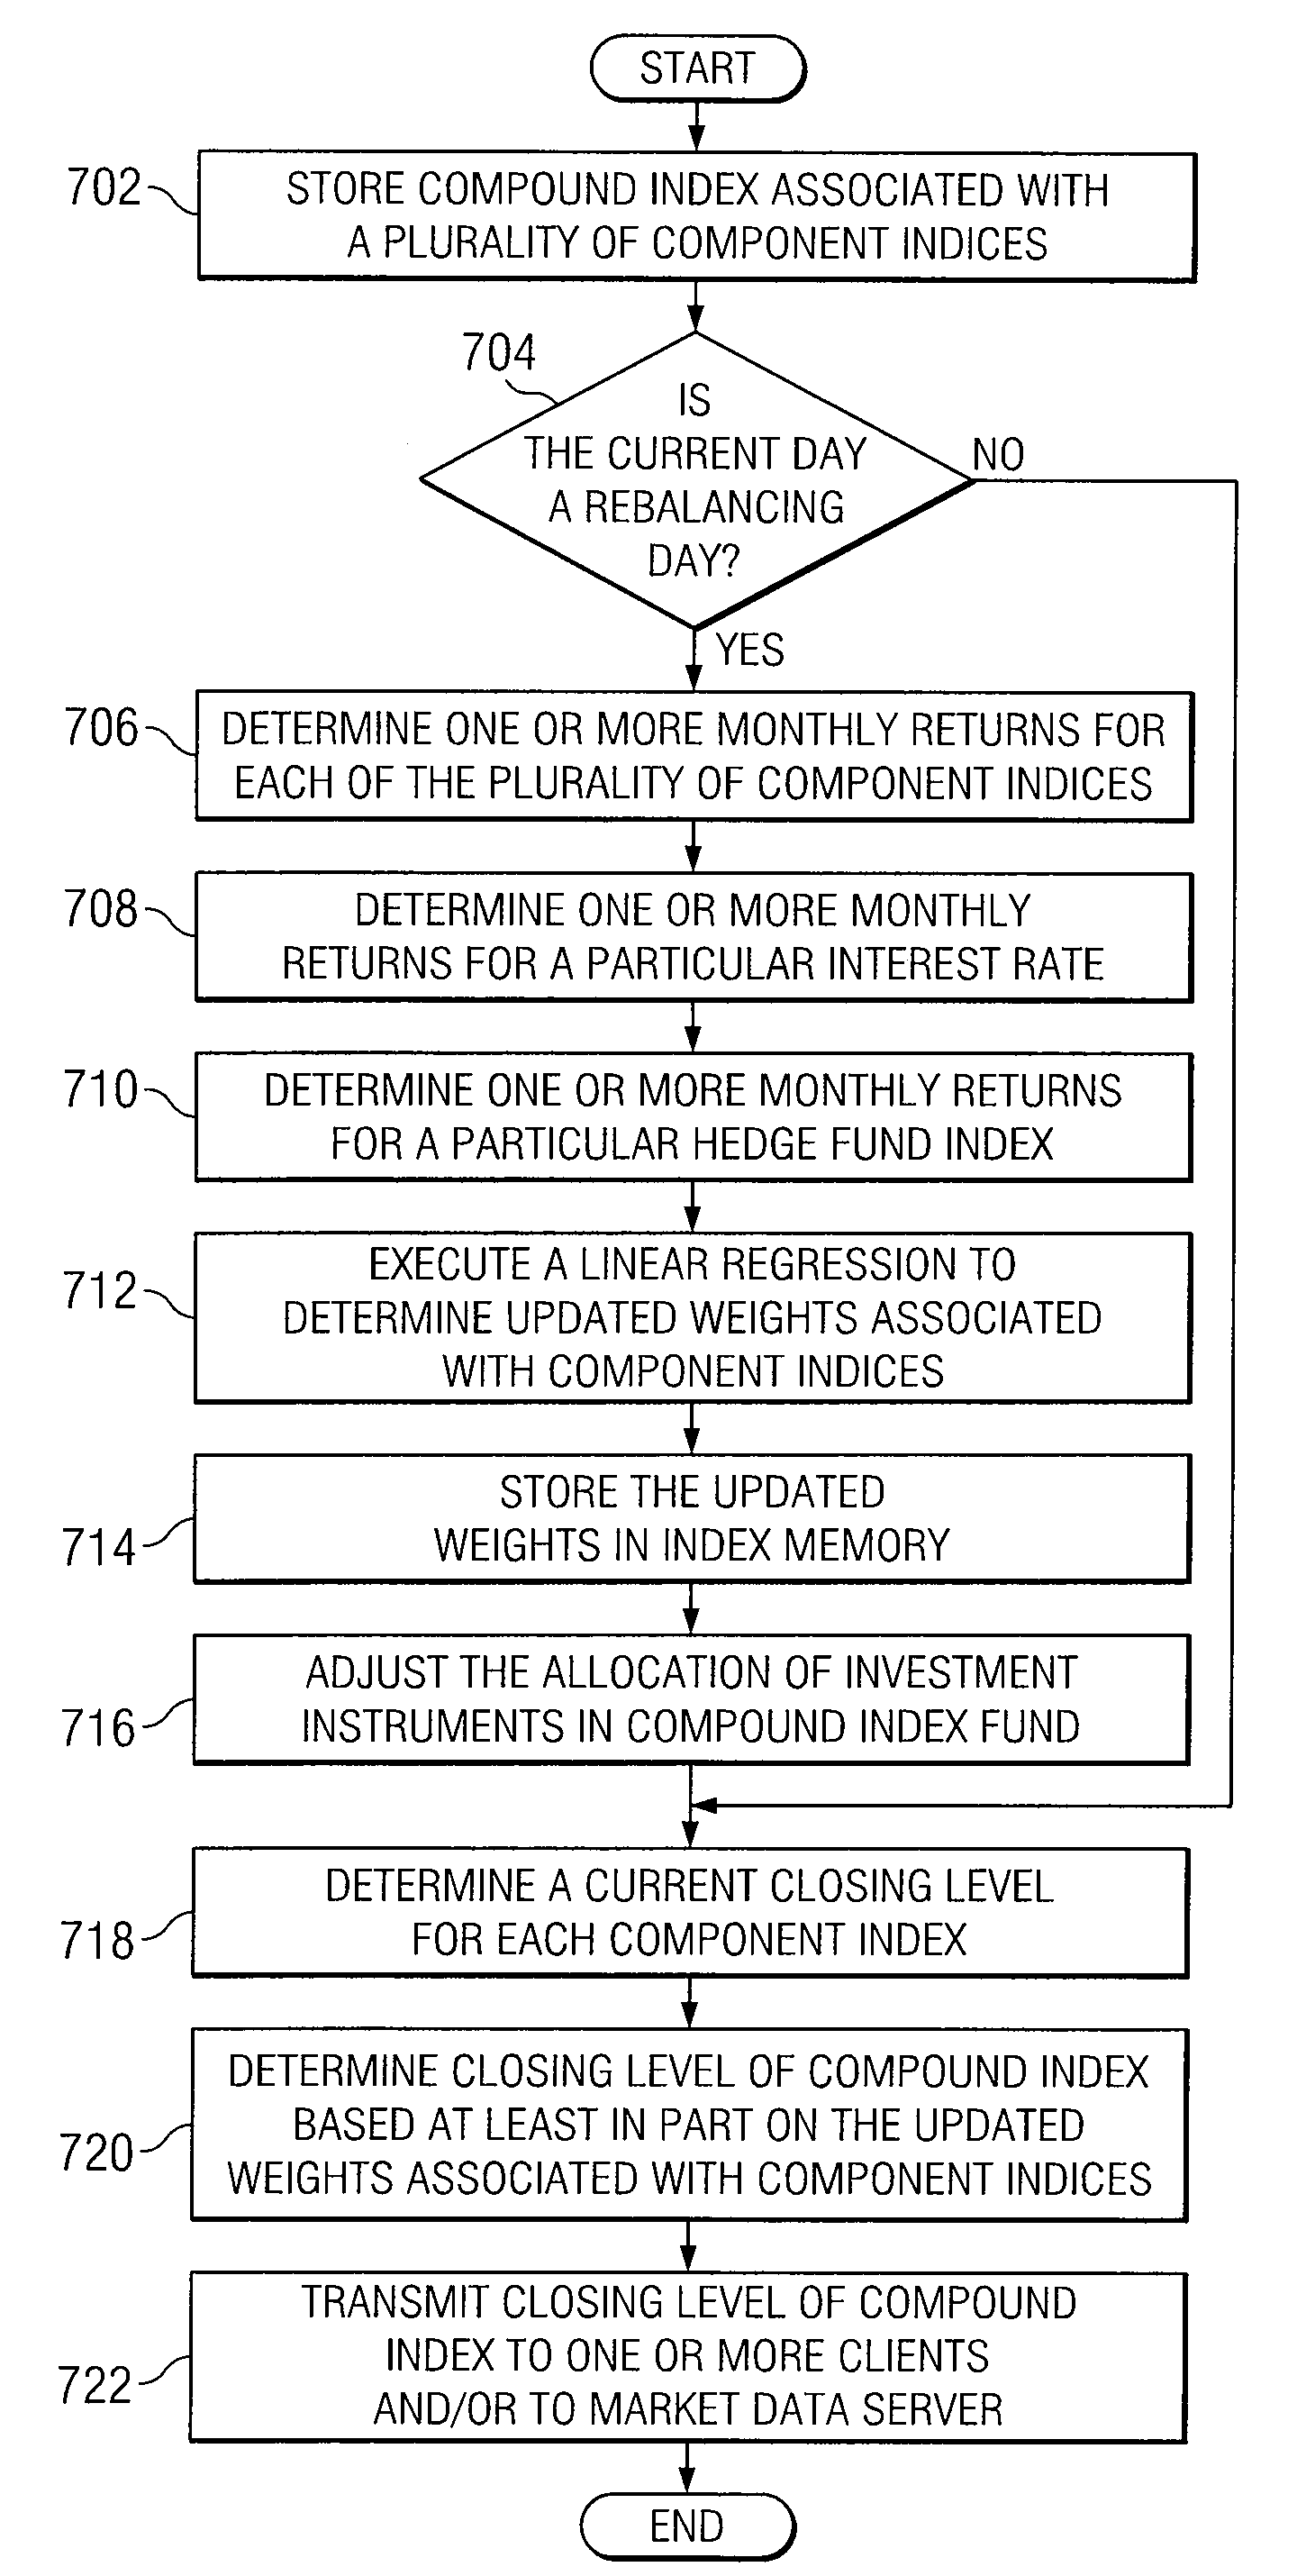 System and Method for Emulating a Long/Short Hedge Fund Index in a Trading System